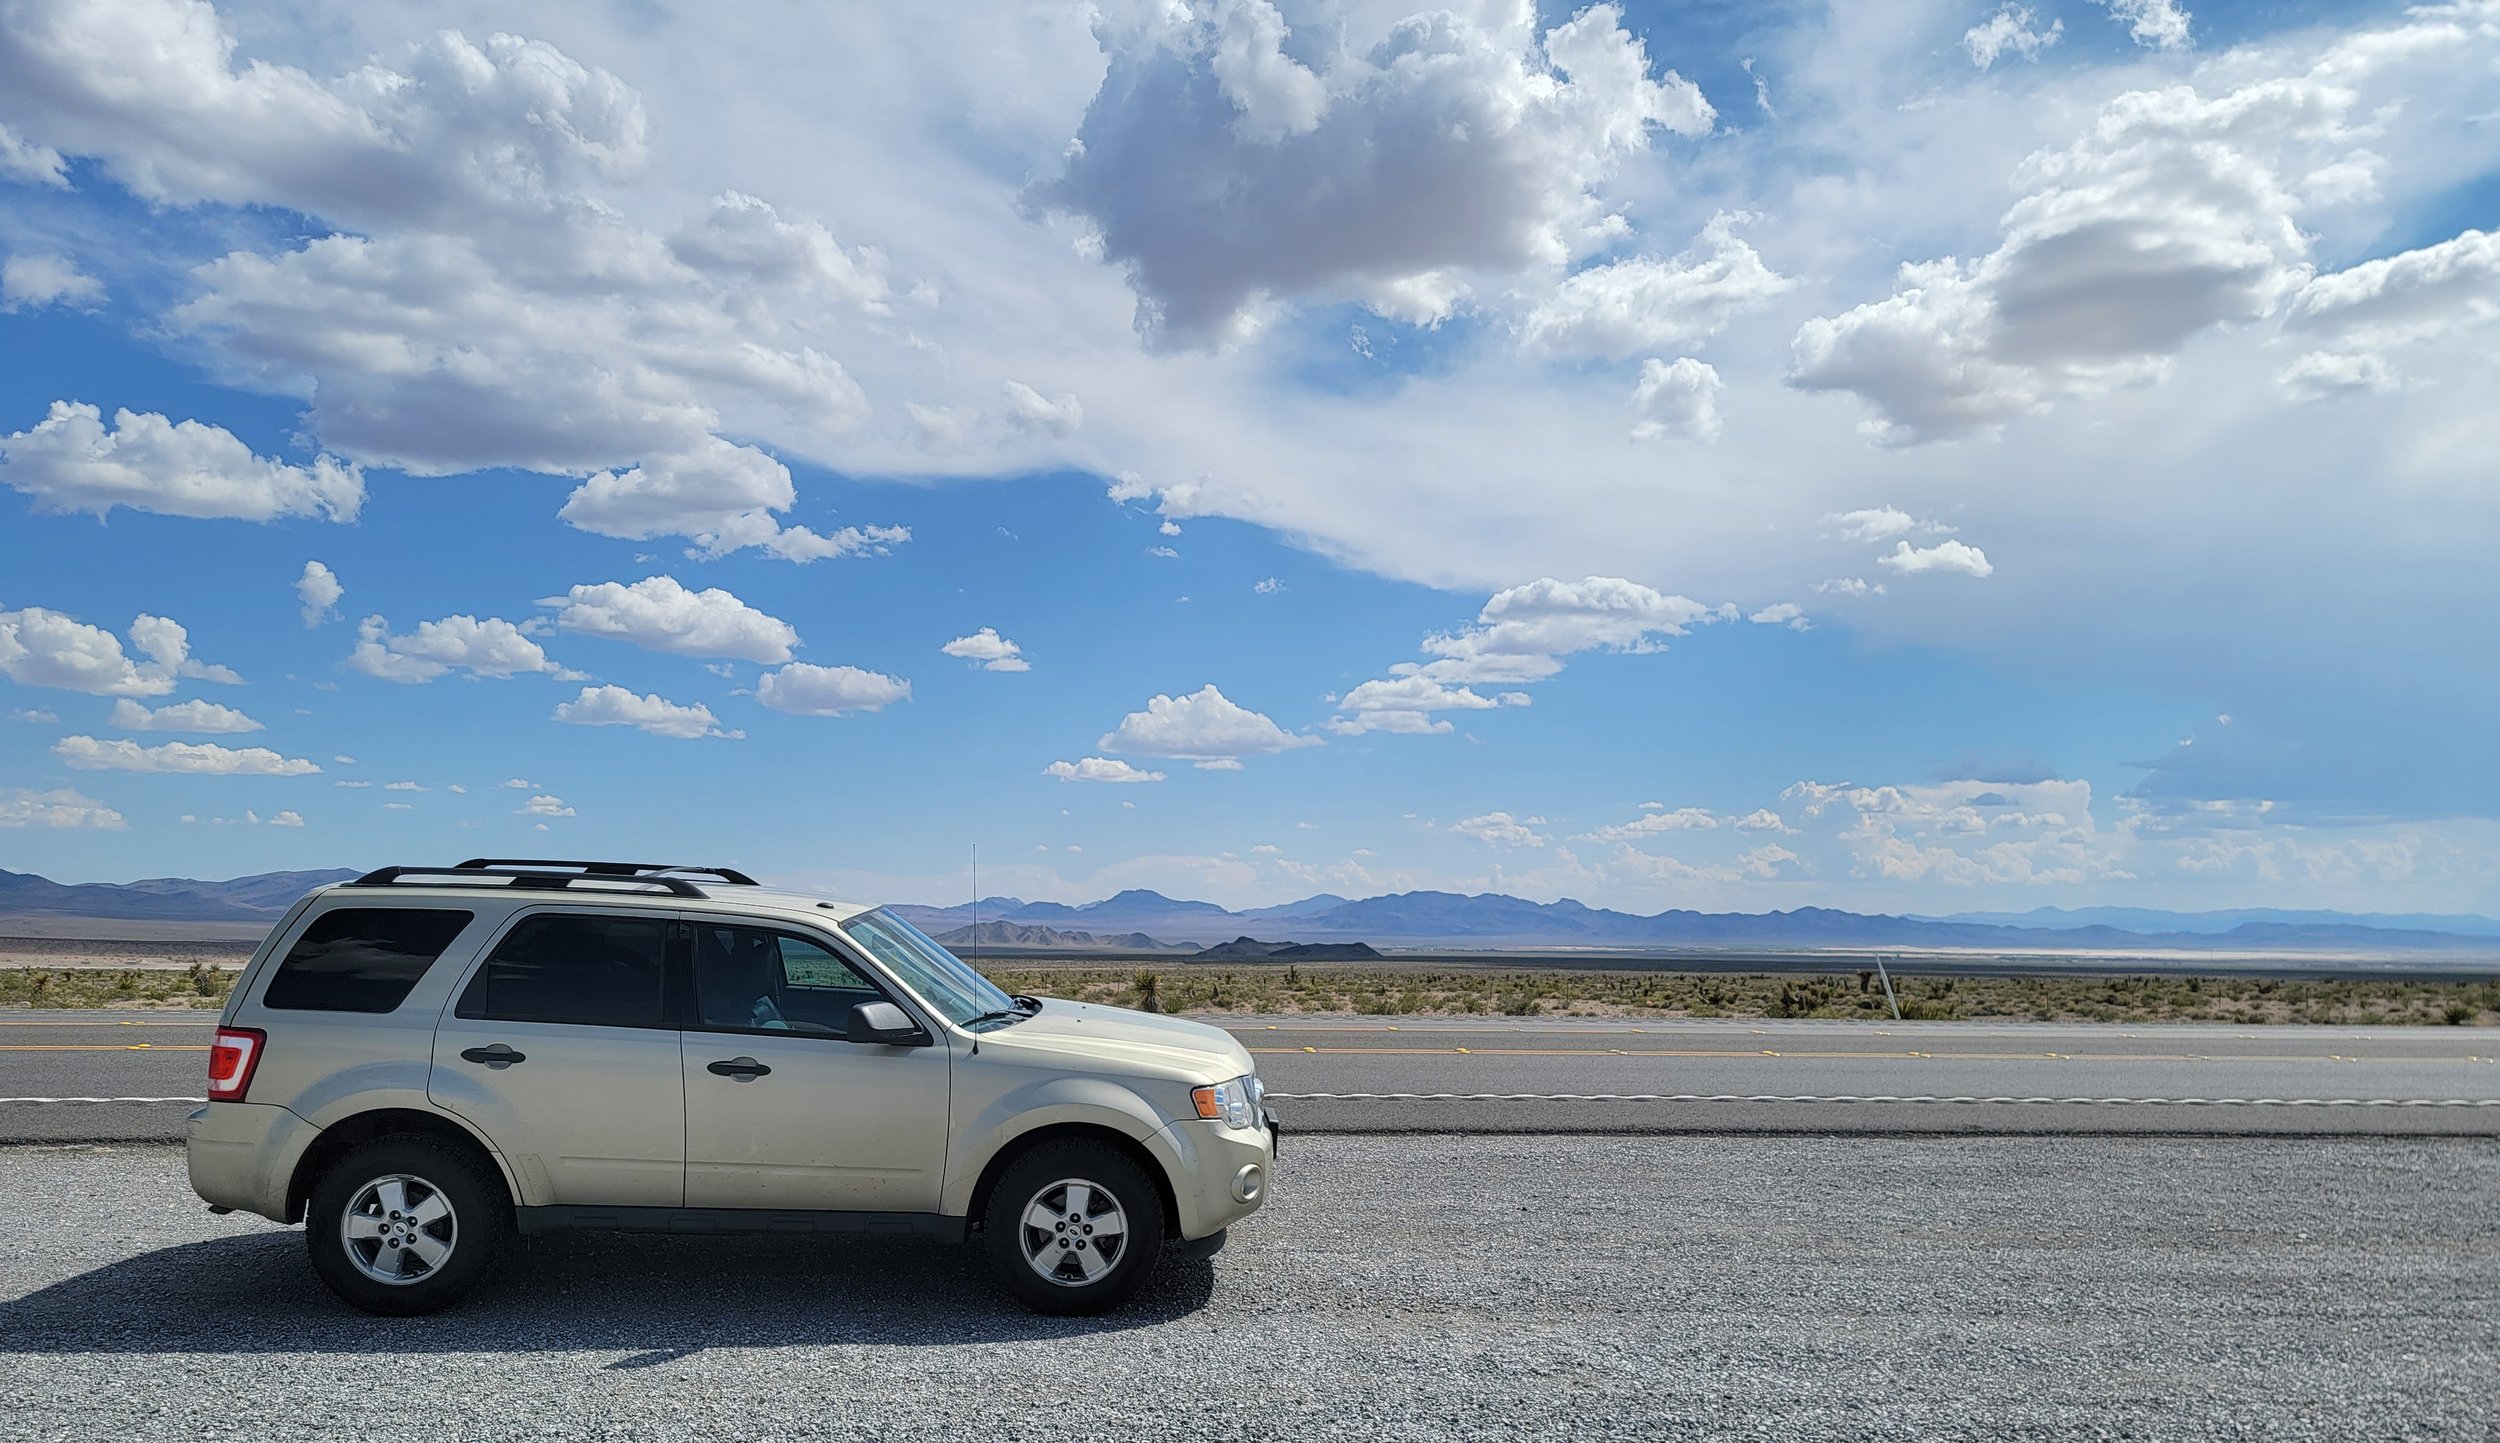 Now you're really getting into that Arizona desert landscape. Flat, no trees and bald mountains in the horizon as far as the eye can see.